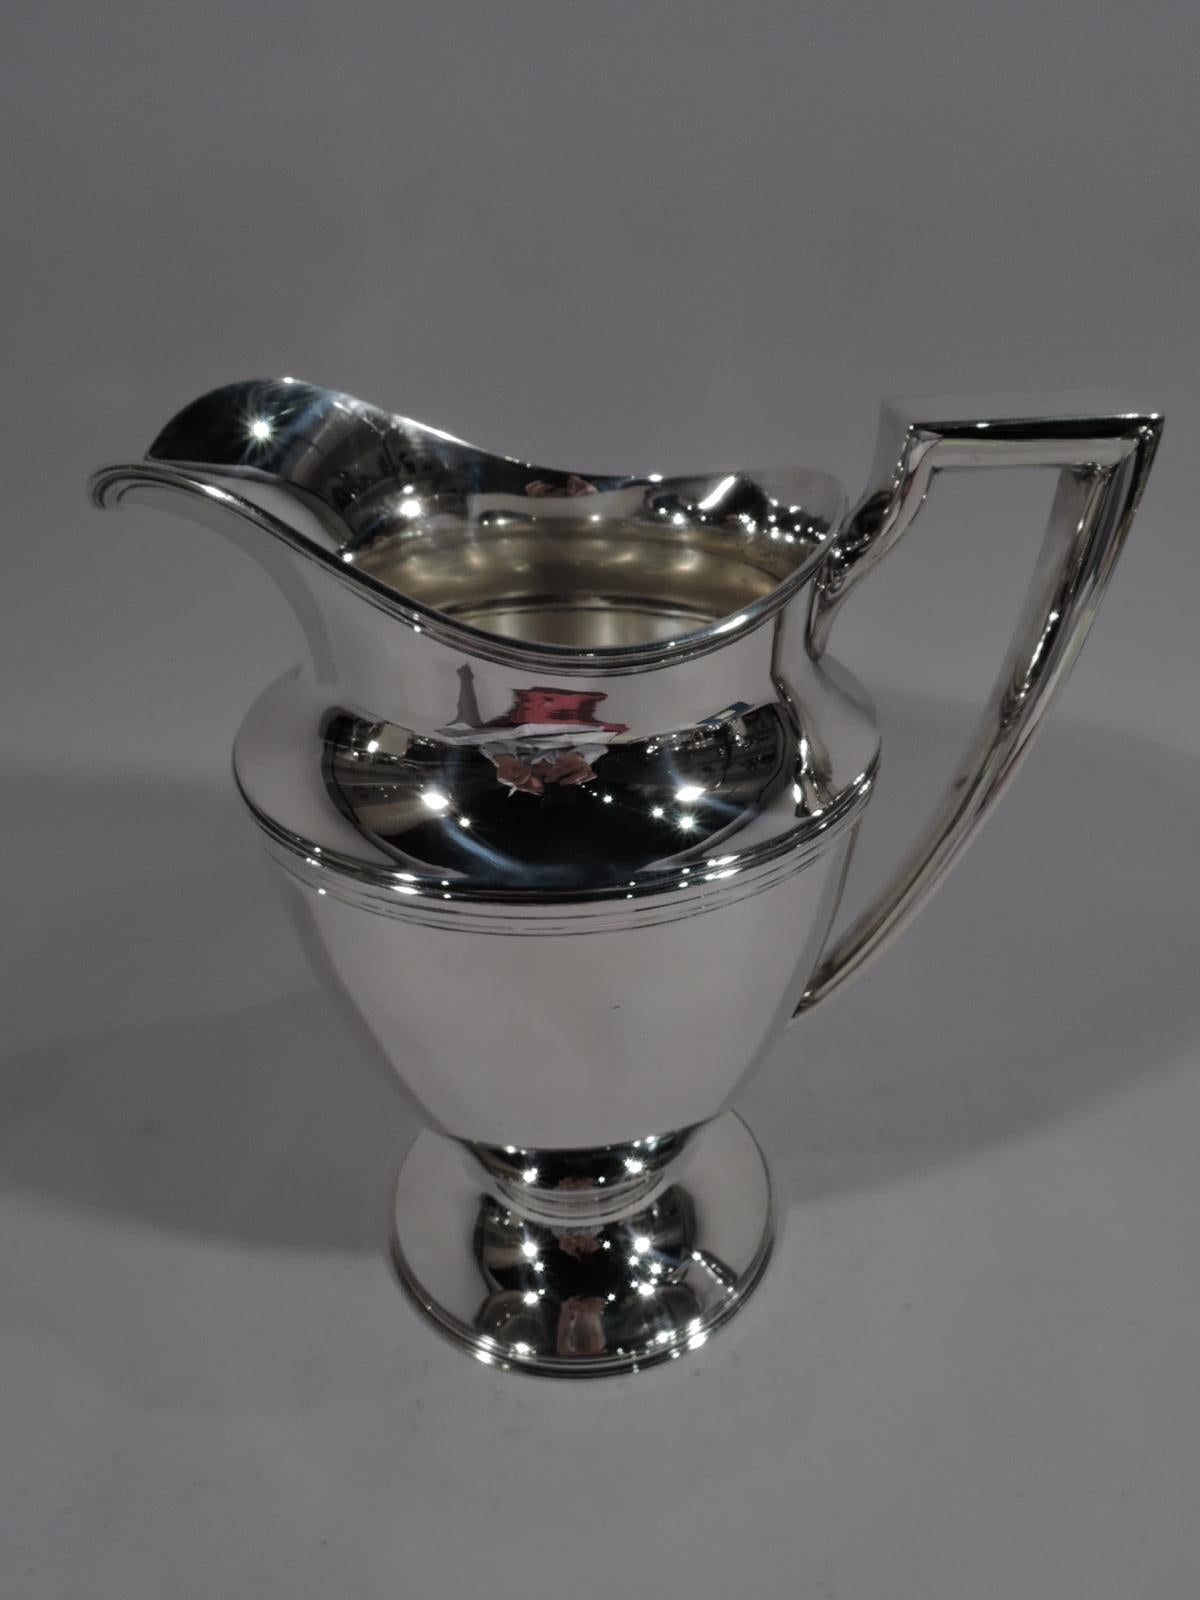 Classic sterling silver water pitcher. Made by Tiffany & Co. in New York. Curved and tapering body, raised and stepped foot, scrolled bracket handle, and helmet mouth. Reeding. Fully marked including pattern no. 18181, director’s letter m